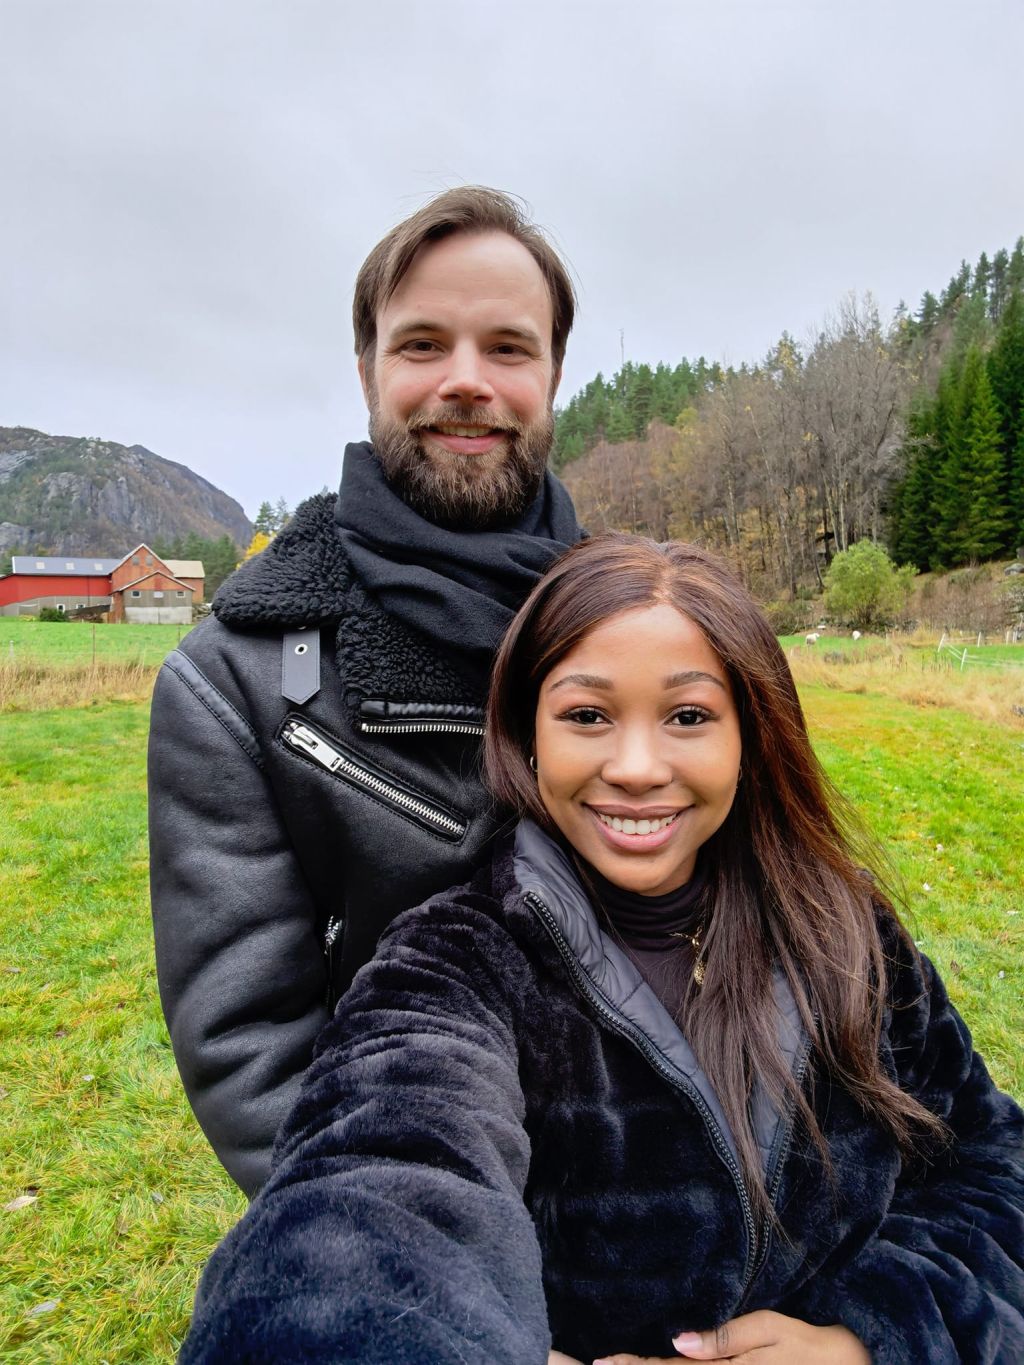 A beautiful African Christian woman in Norway smiles in front of a smiling bearded Caucasian man